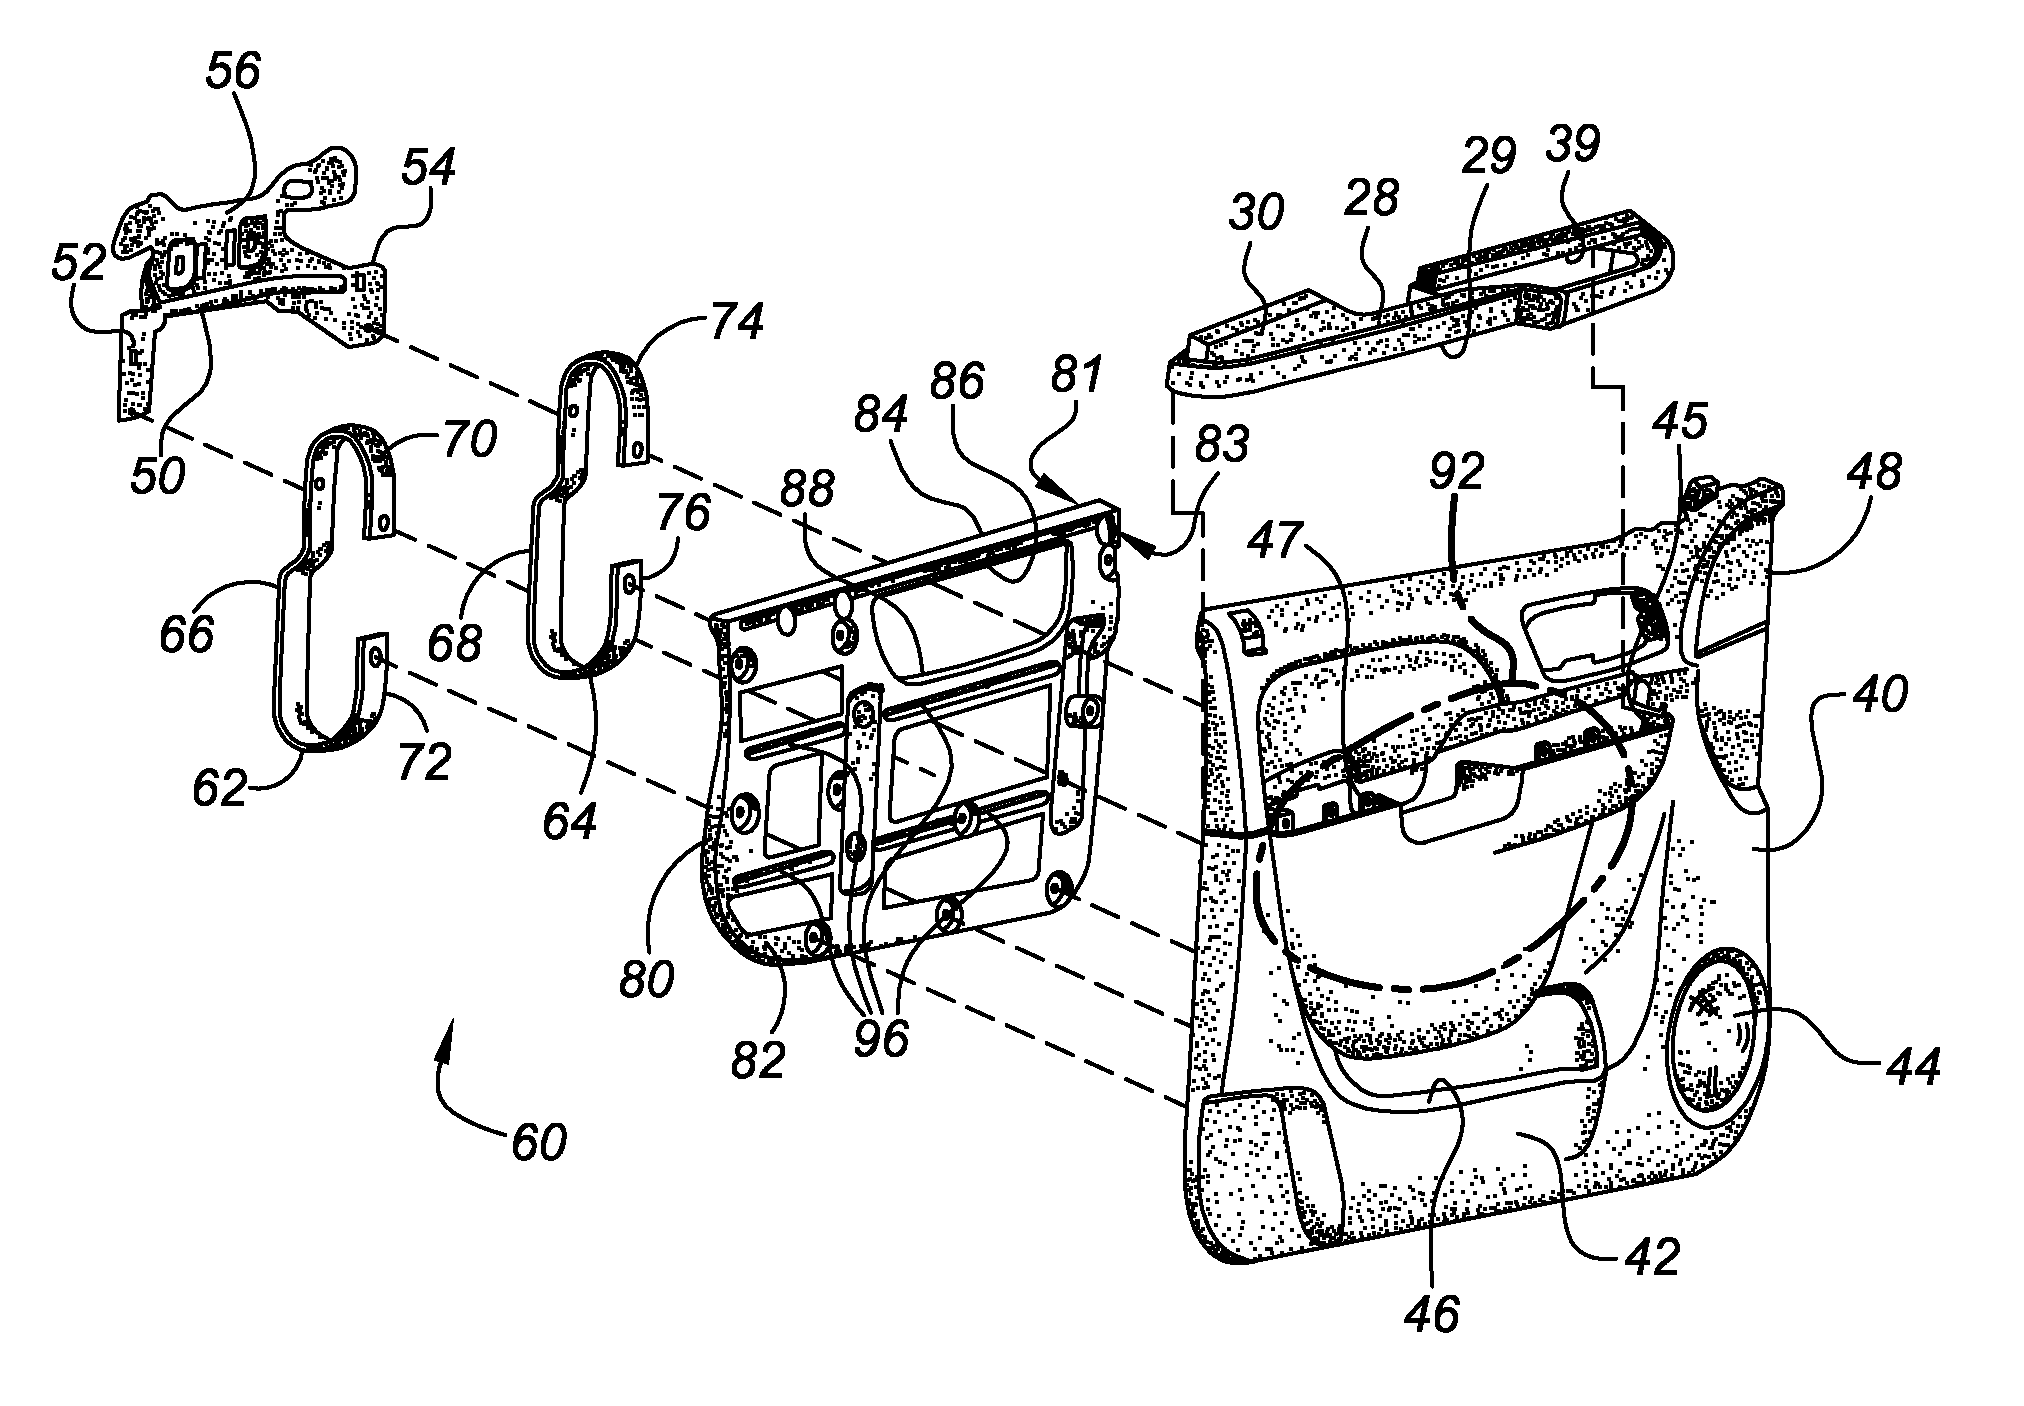 Energy-absorbing system for vehicle door assembly